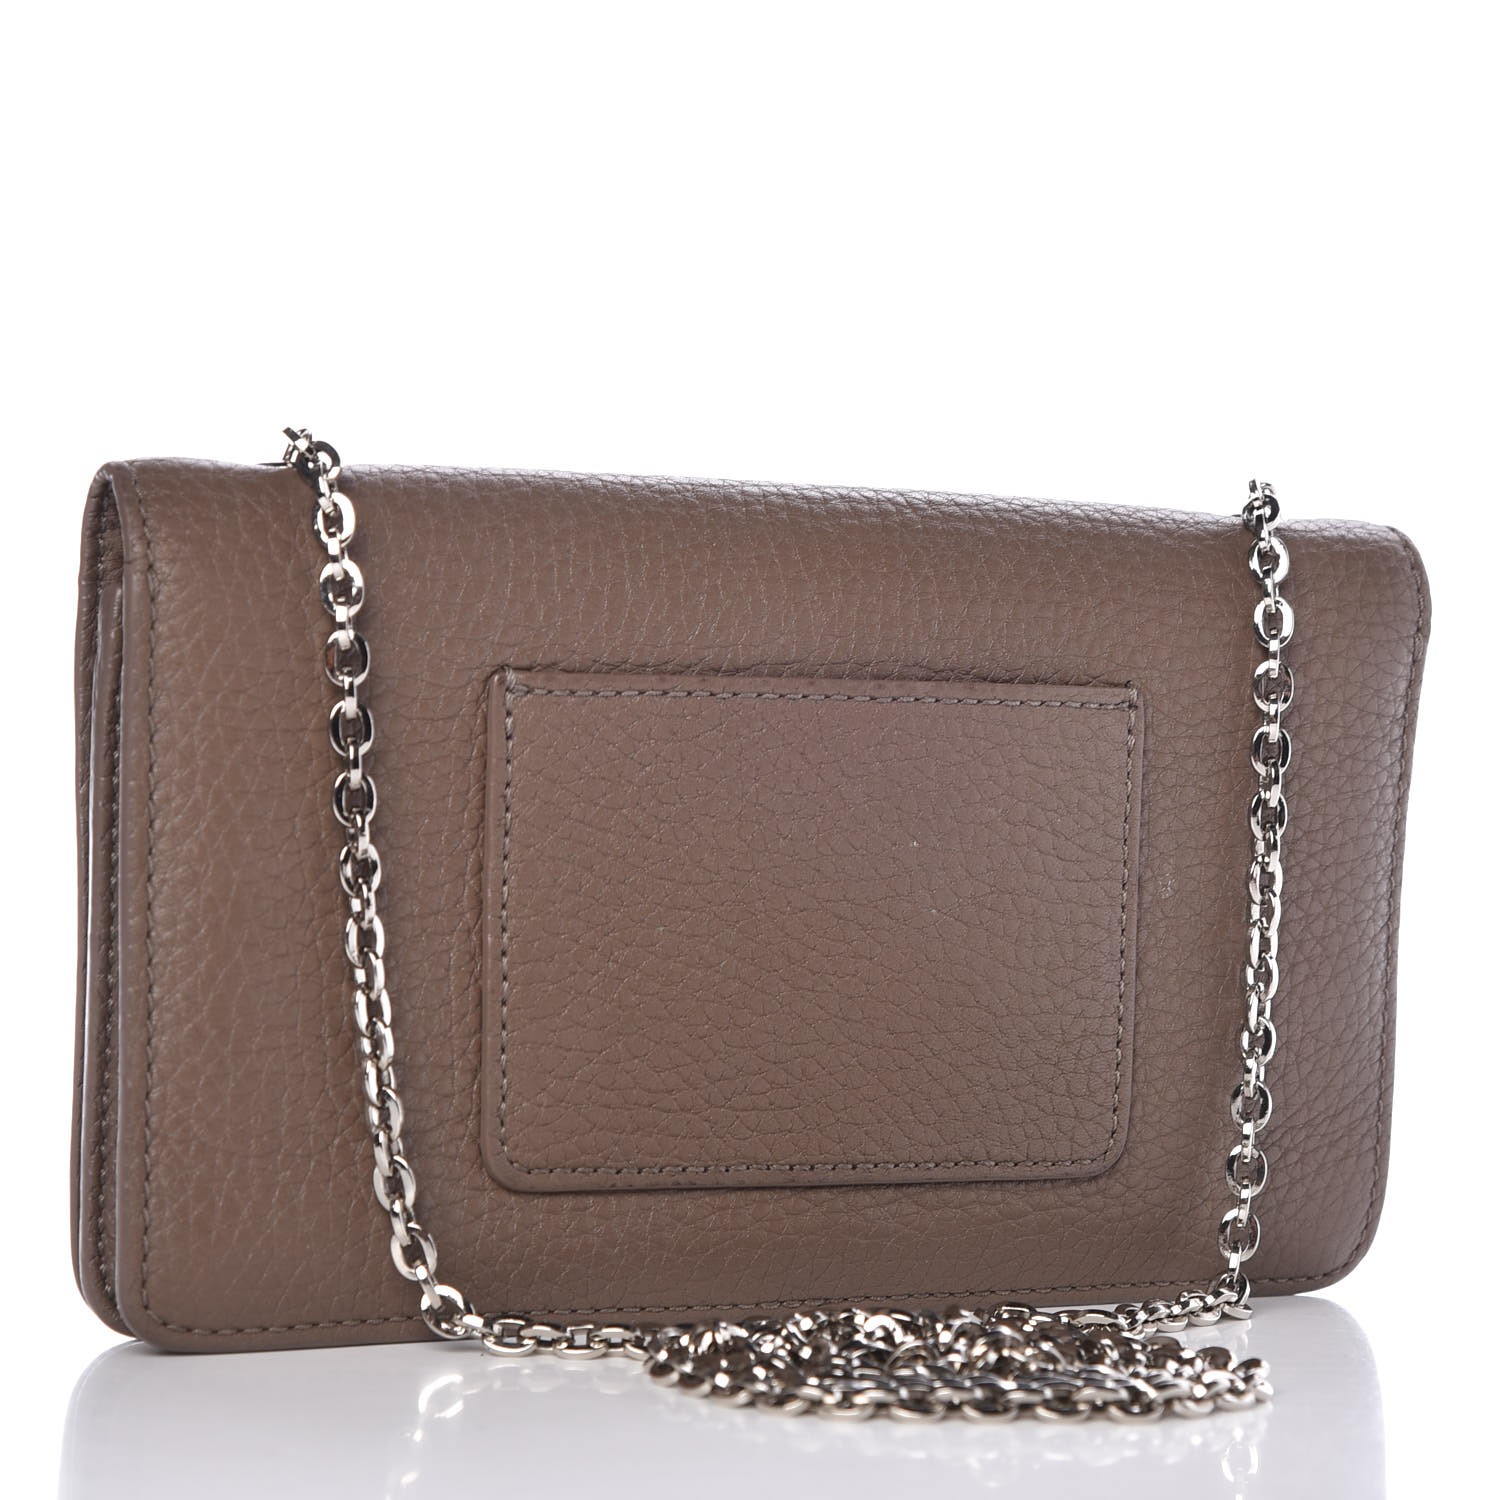 MULBERRY Grainy Print Bayswater Clutch Wallet Taupe 340458